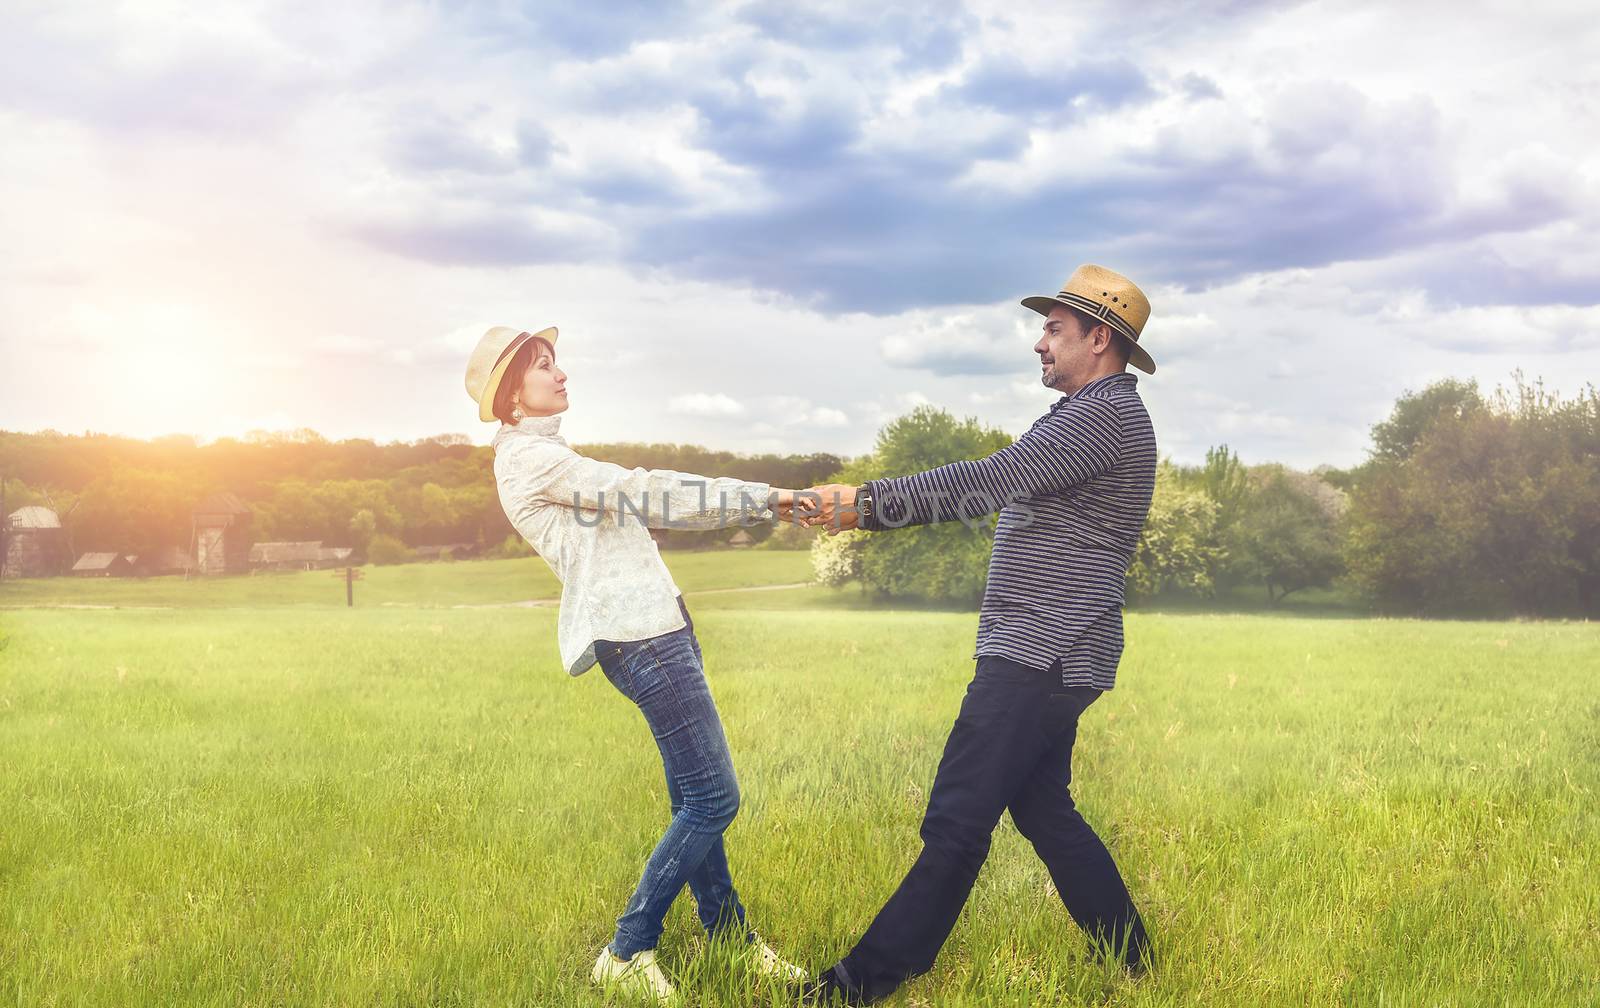 a portrait of a happy middle-aged couple holding hands in the field. by Nickstock